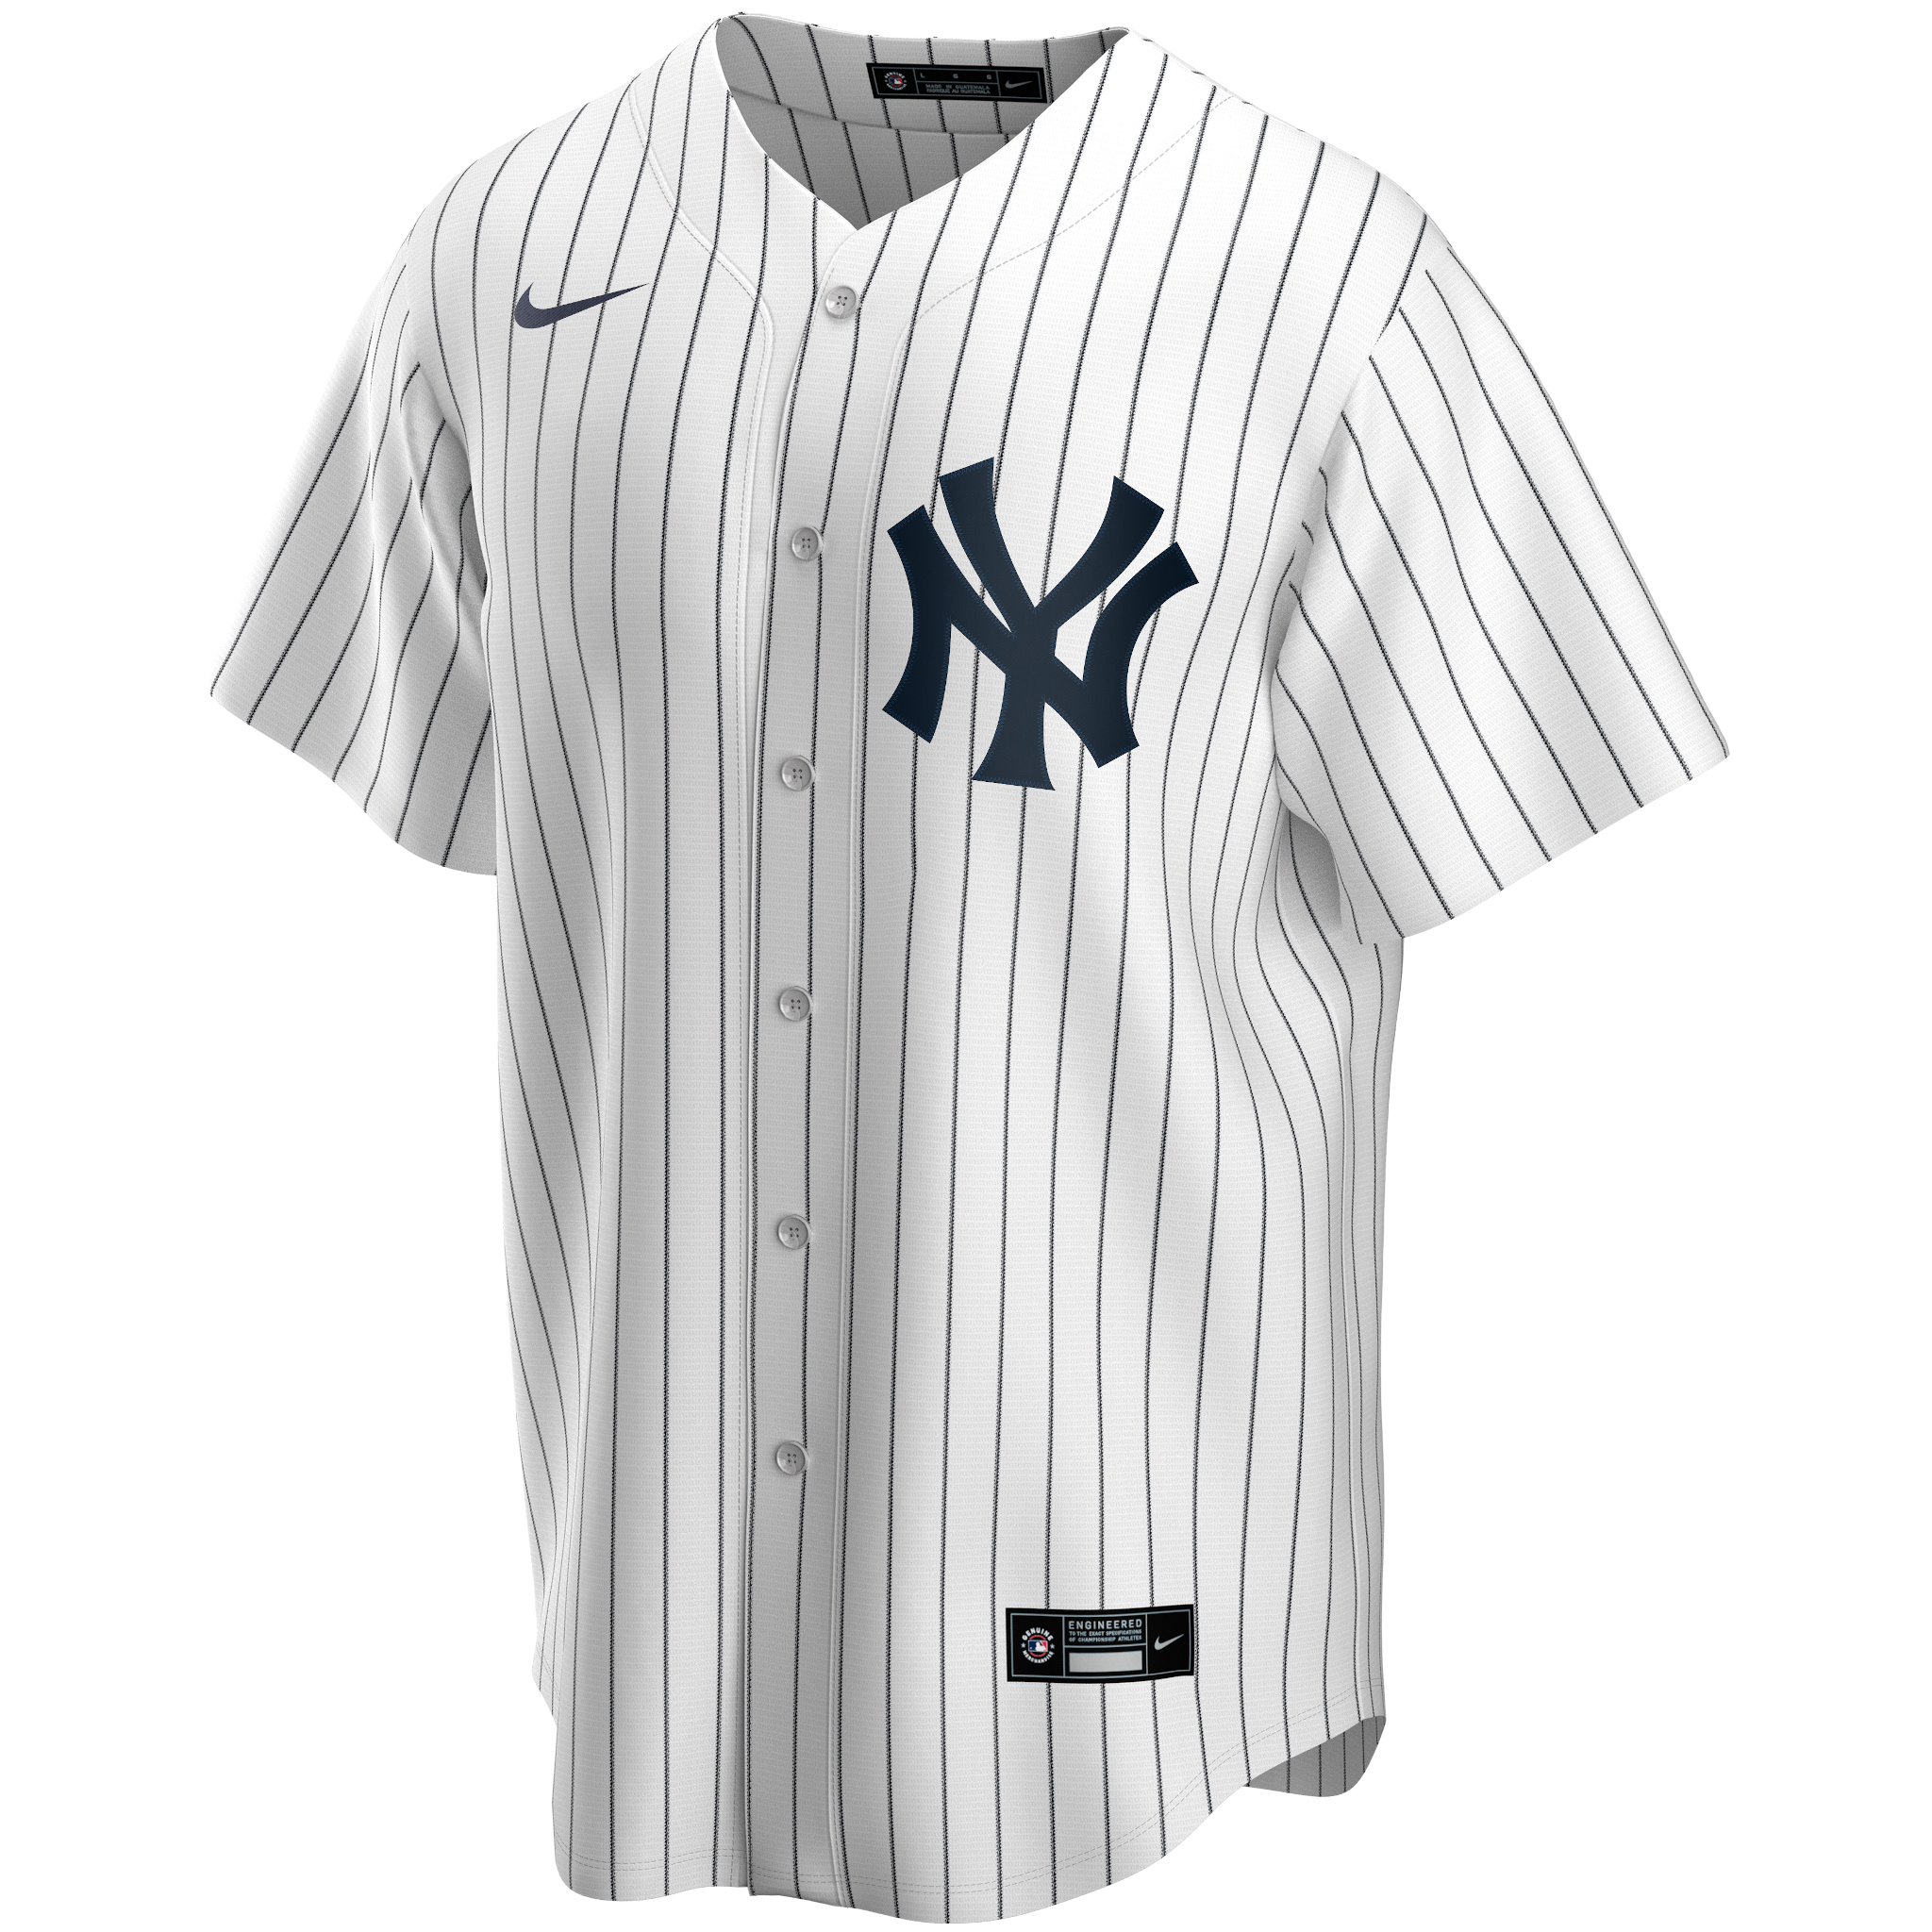 Official NY Yankees Jersey Dress. Free Yankee T- shirt for Sale in  Homestead, FL - OfferUp